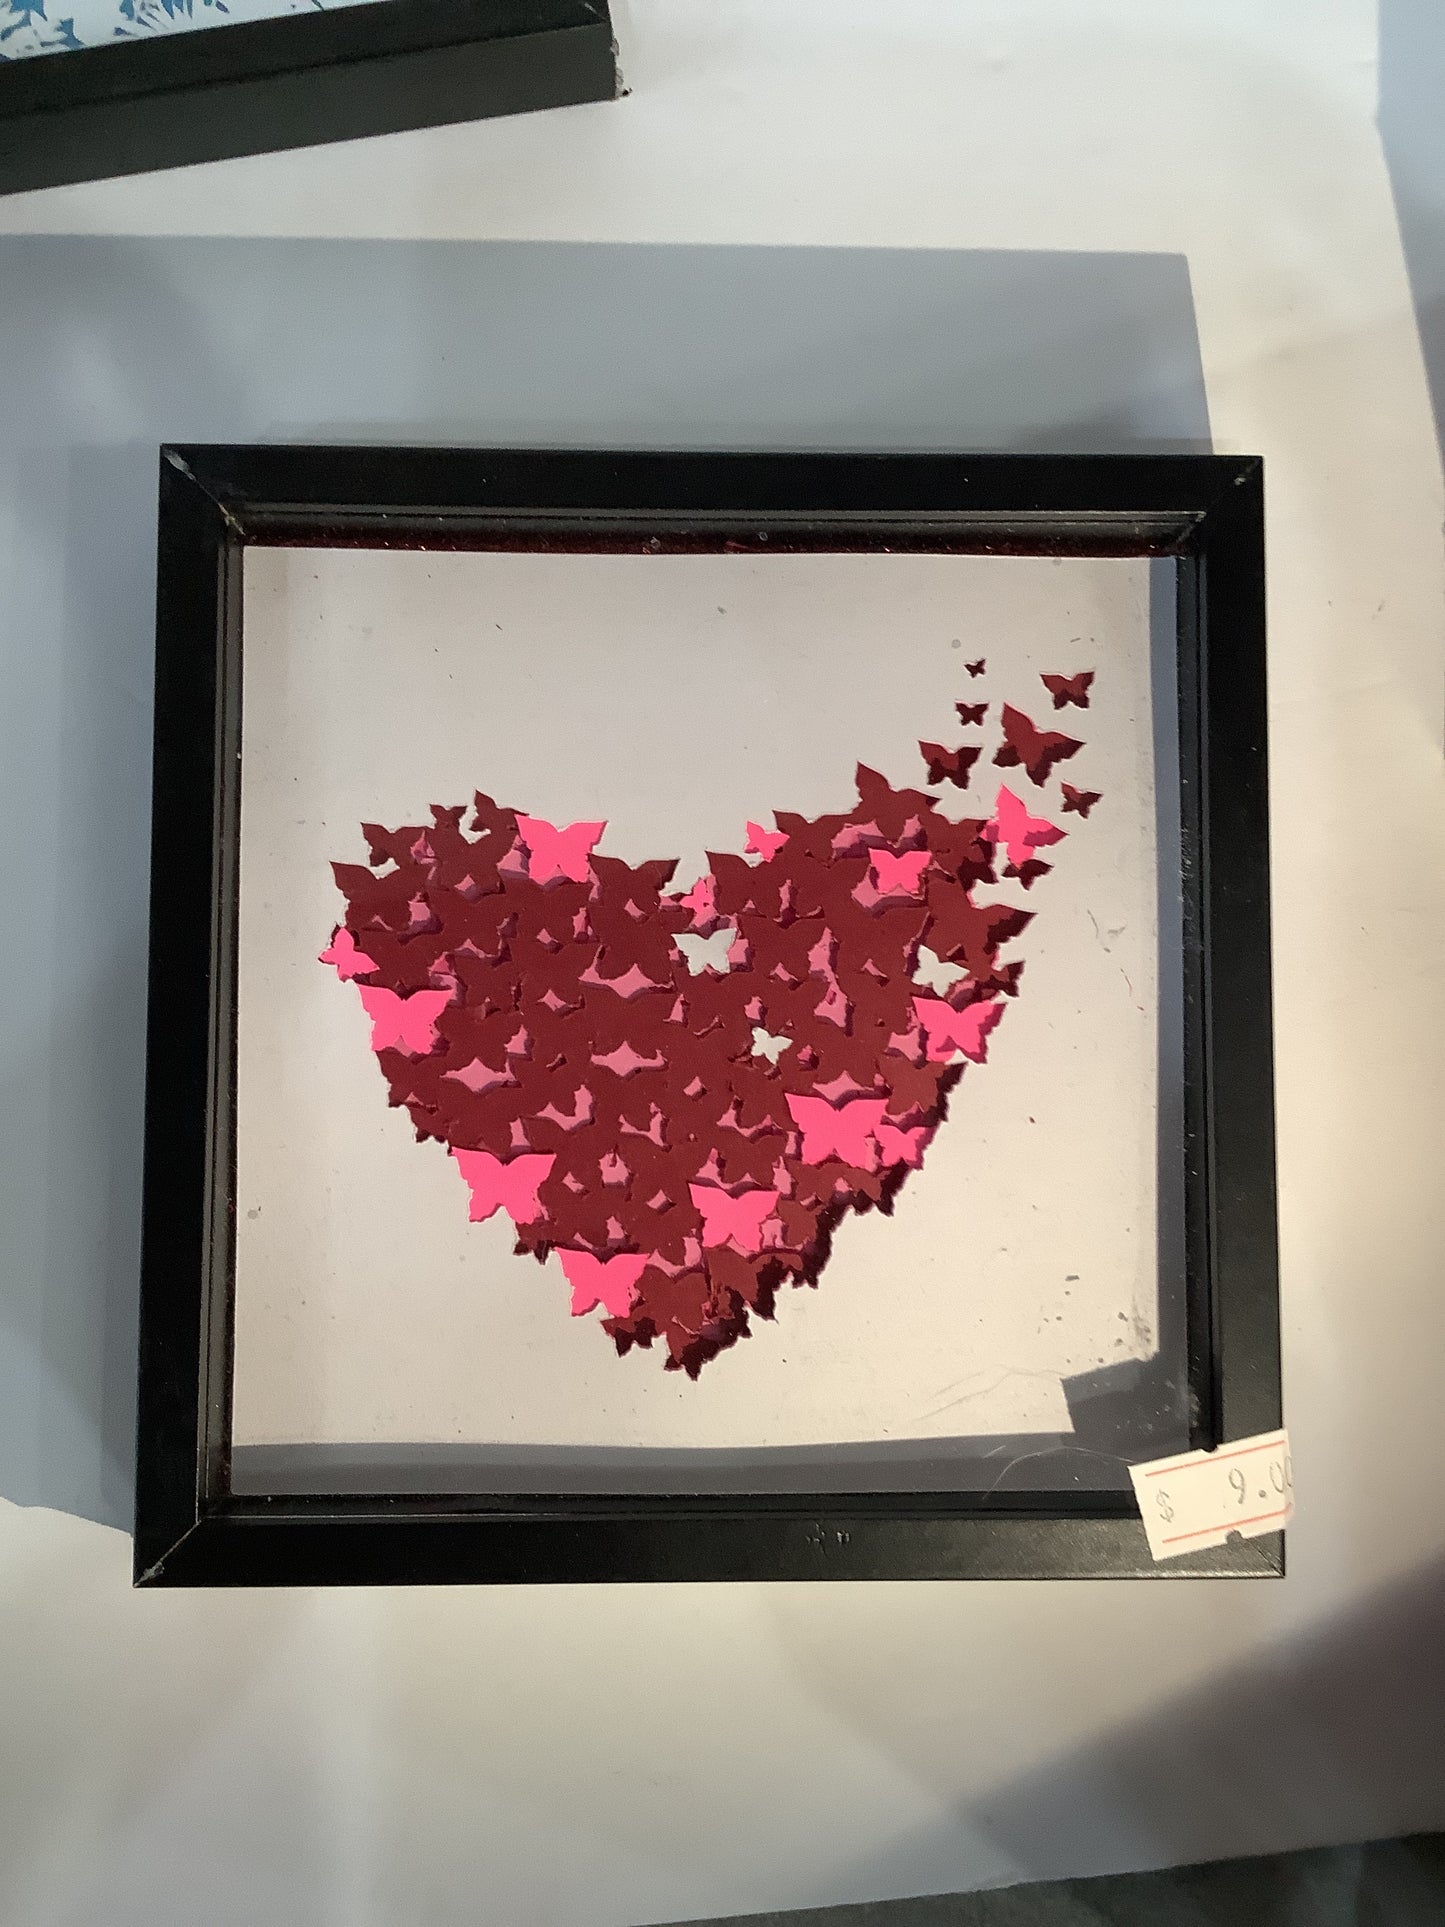 5 1/2 x 5 1/2 black shadow box with paper cut butterflies, turning into a heart